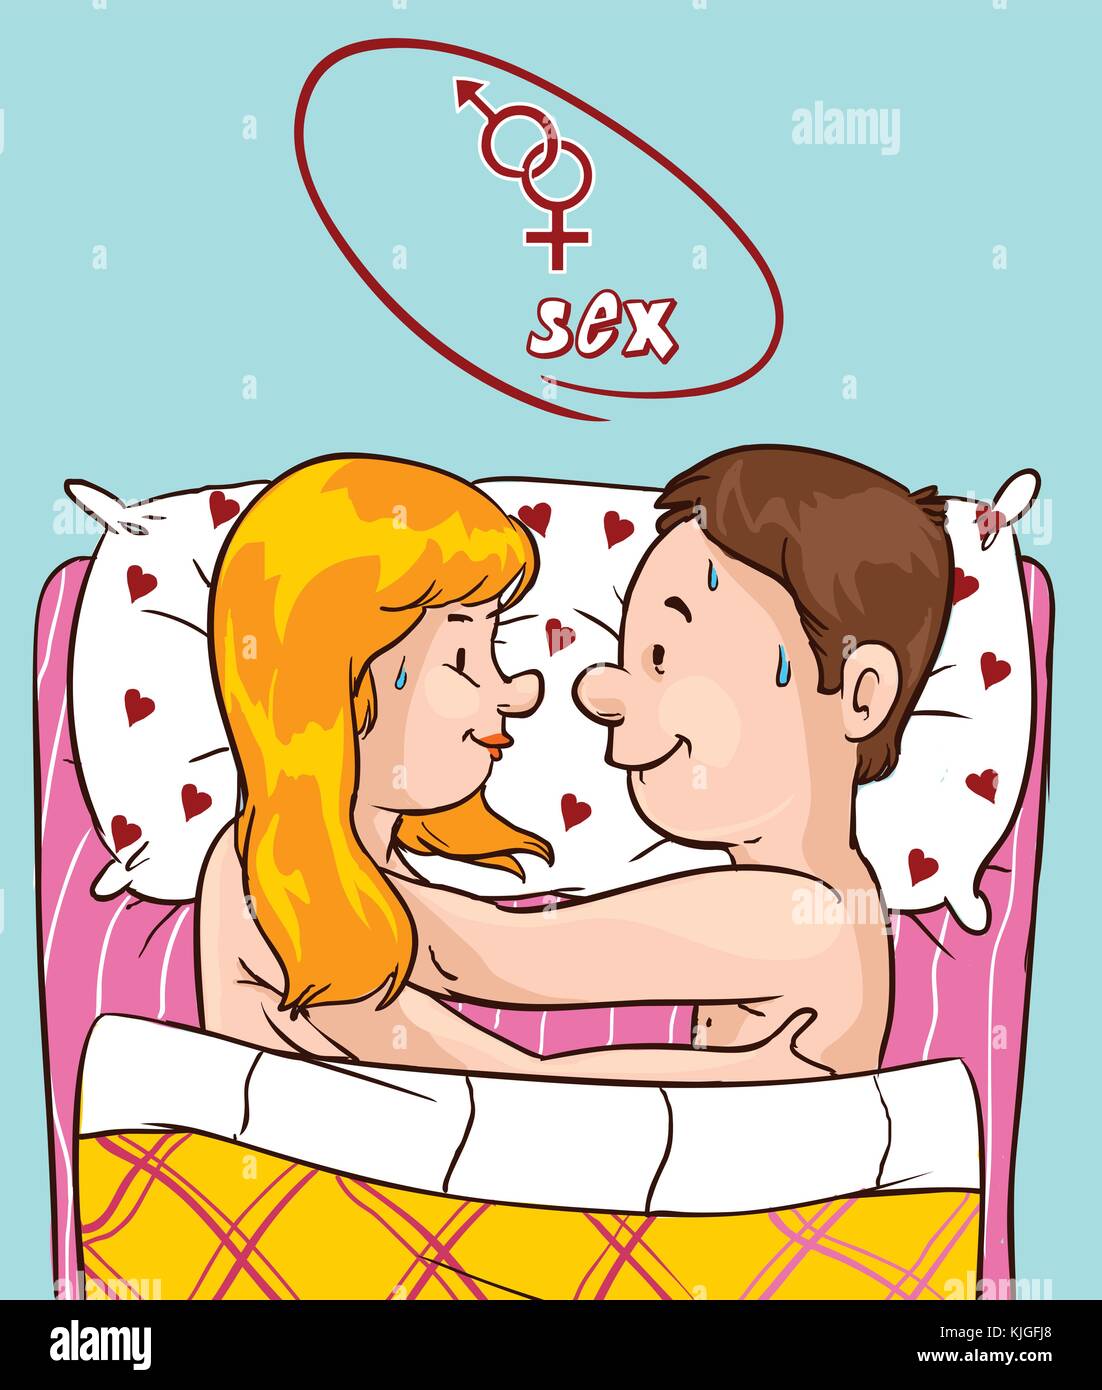 Man and woman couple at bed vector illustration Stock Vector